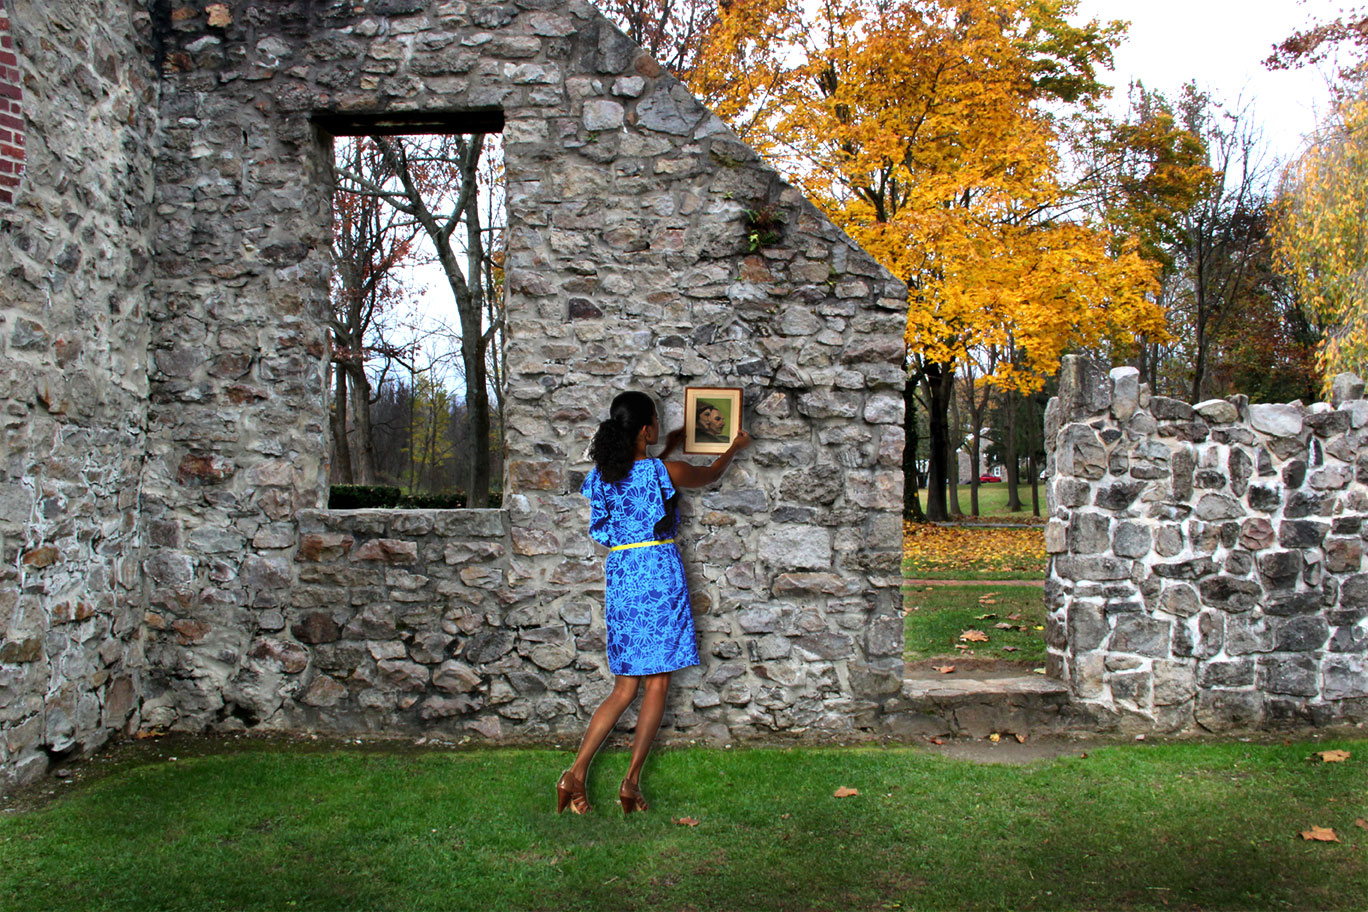 Composite image of women hanging a picture frame in the ruins of a building